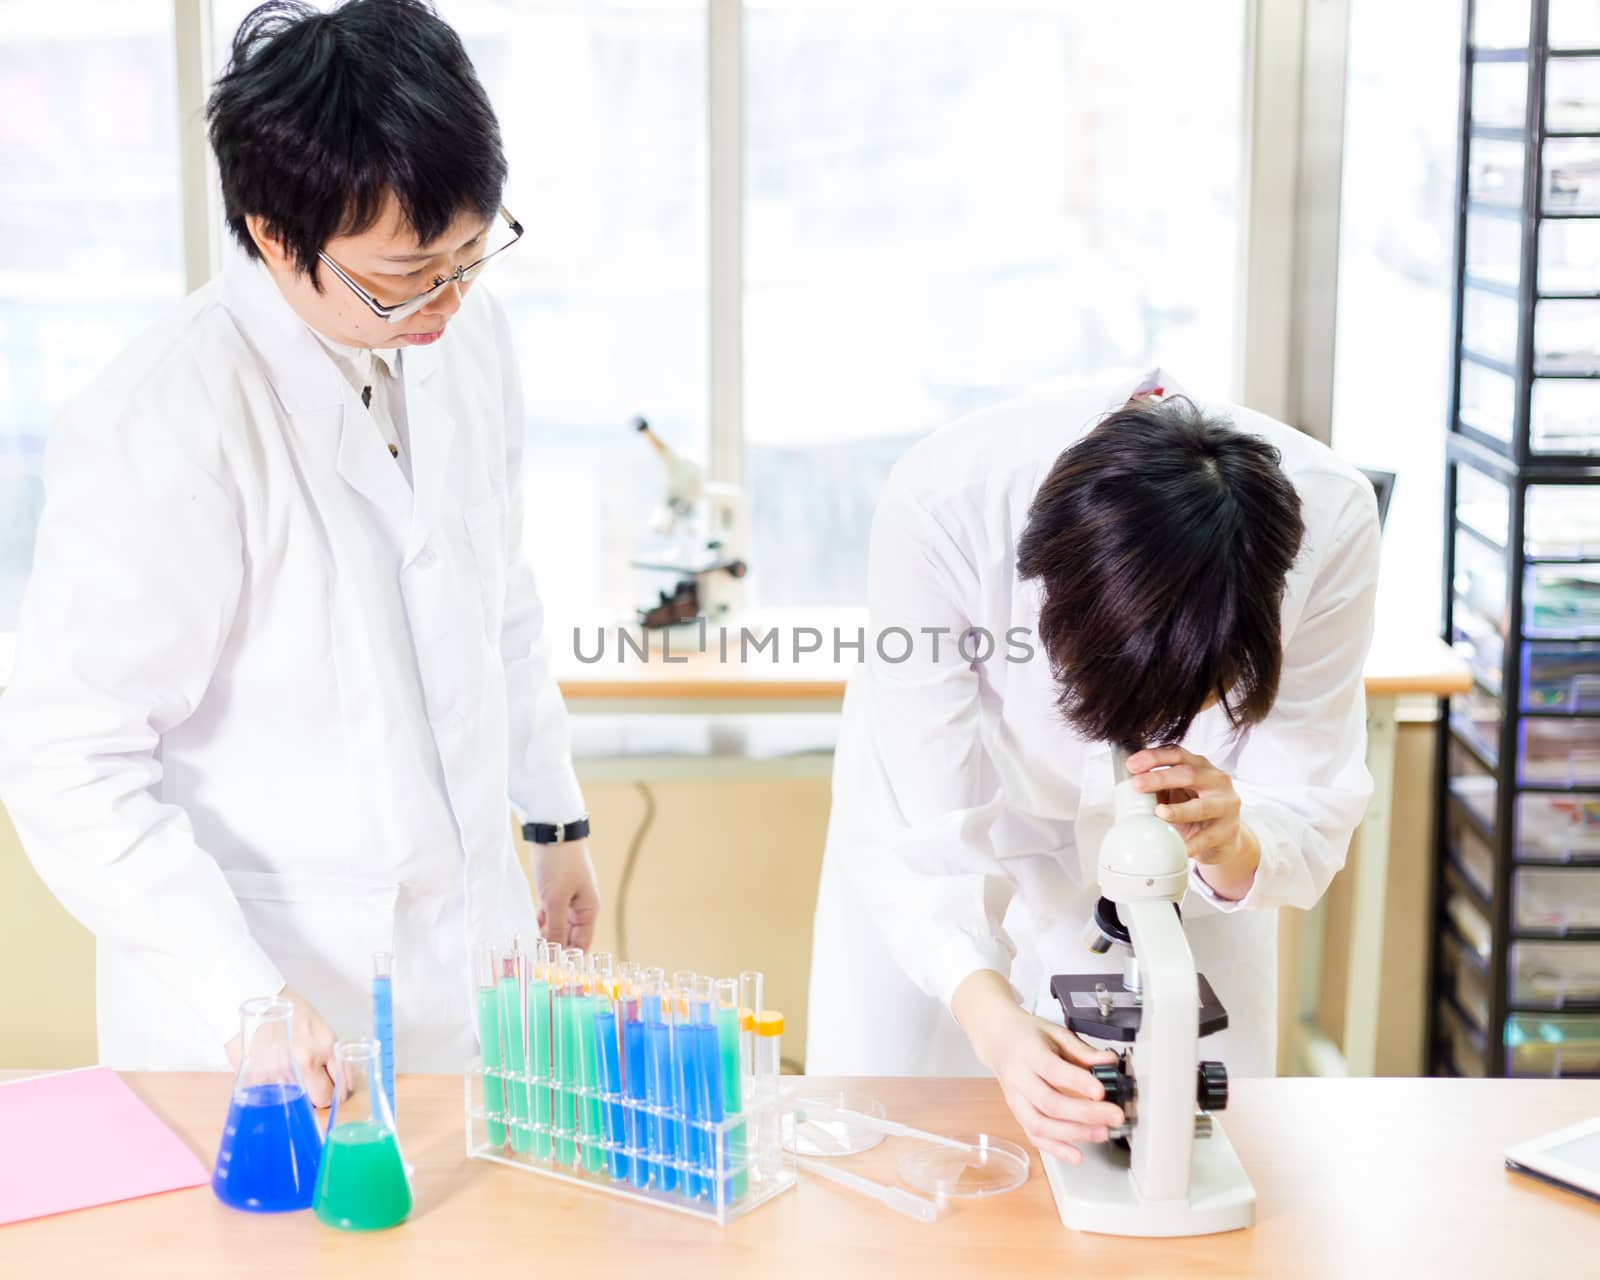 Female Chinese scientists in a laboratory